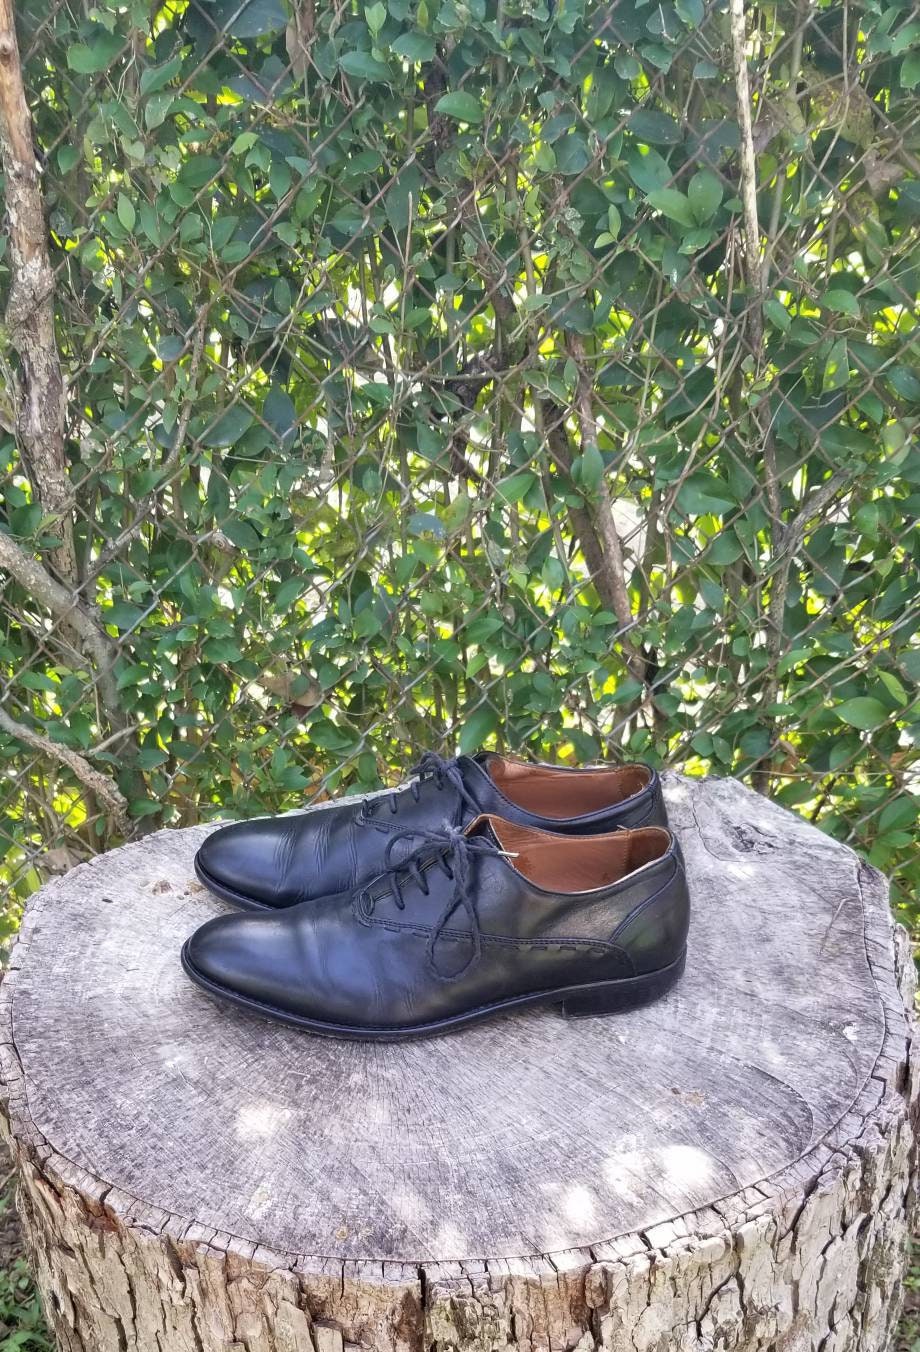 Sz 8 Men's Black Italian Leather Lace Up Shoes by Mike Konos/ Vintage Oxfords Shoes from the 80s/ Black Derby Shoes Schoenen Herenschoenen Oxfords & Wingtips 